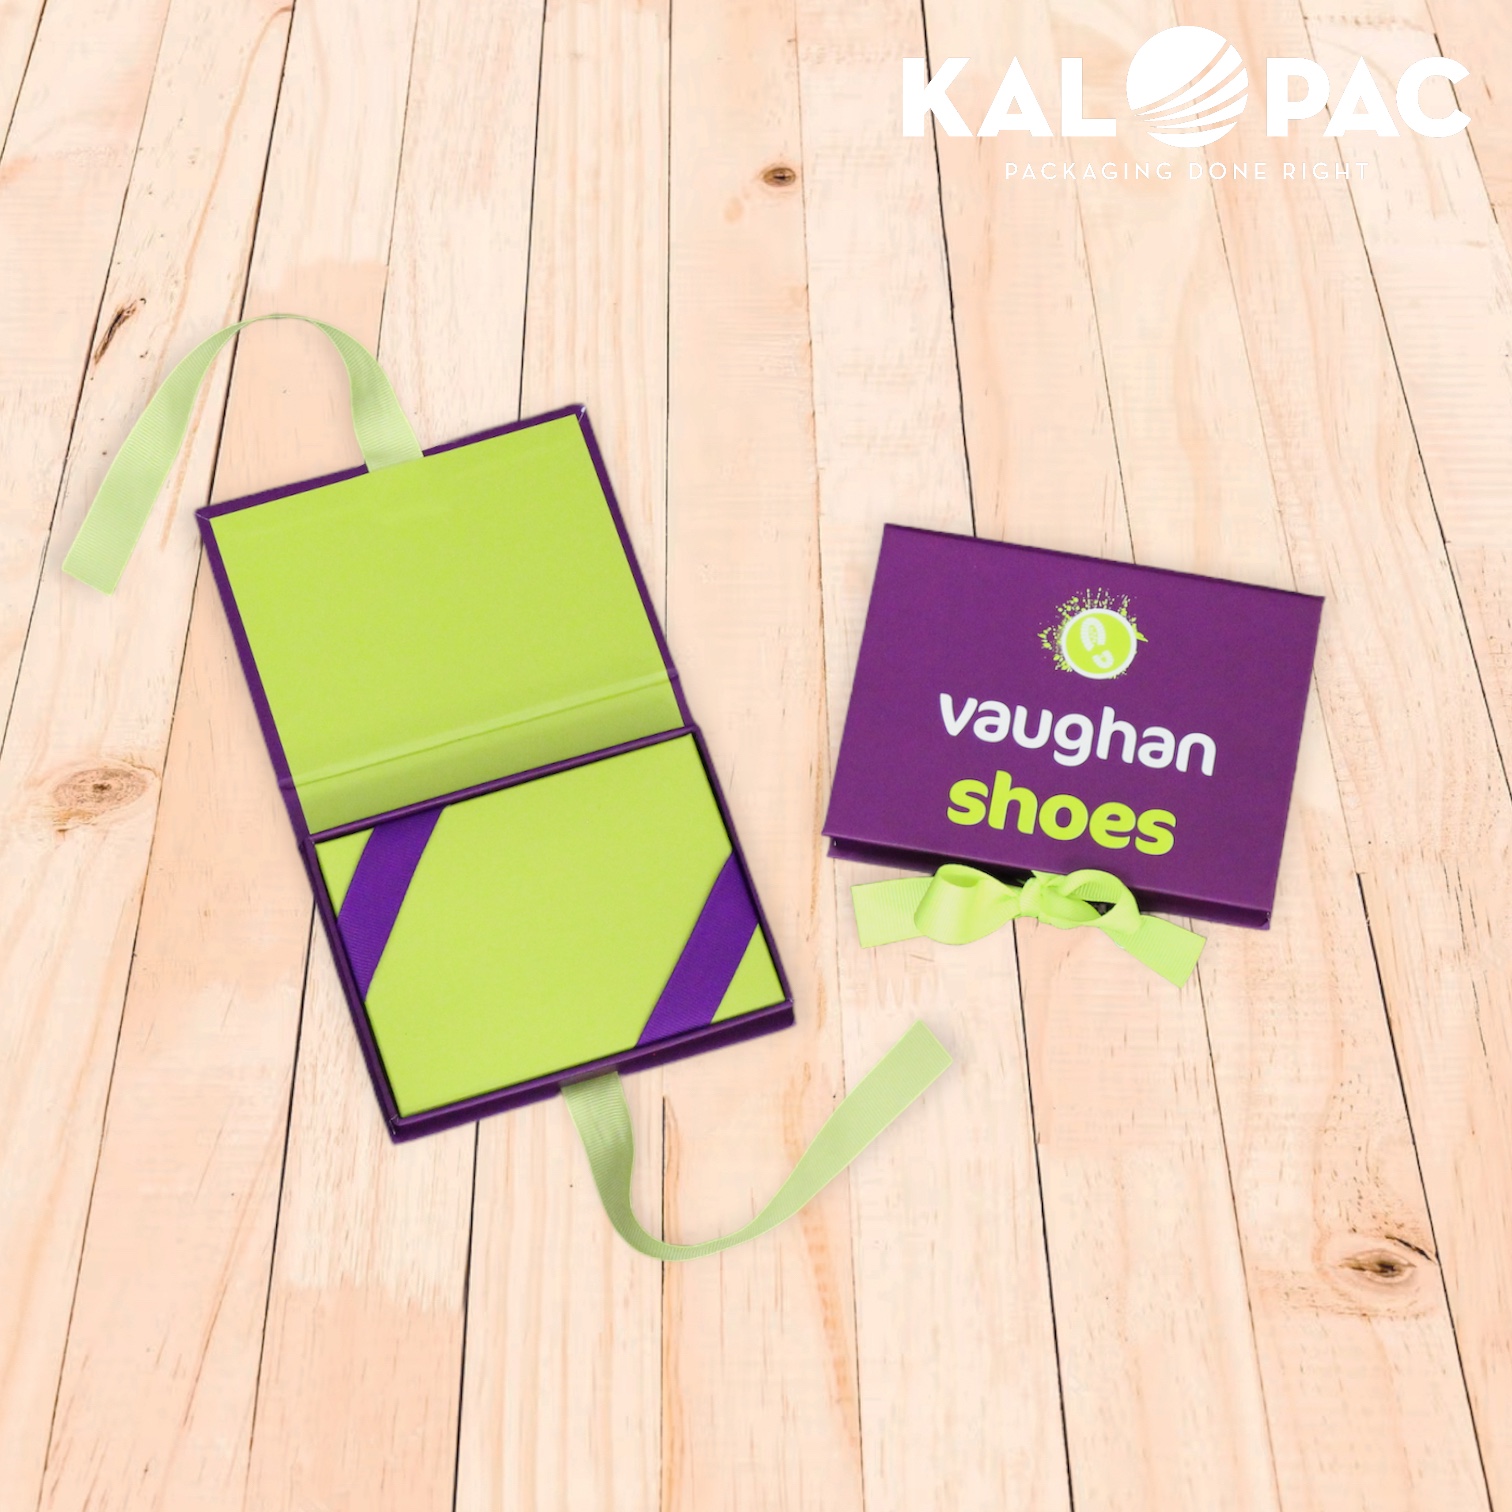 Vaughan Shoes Gift Card Holder